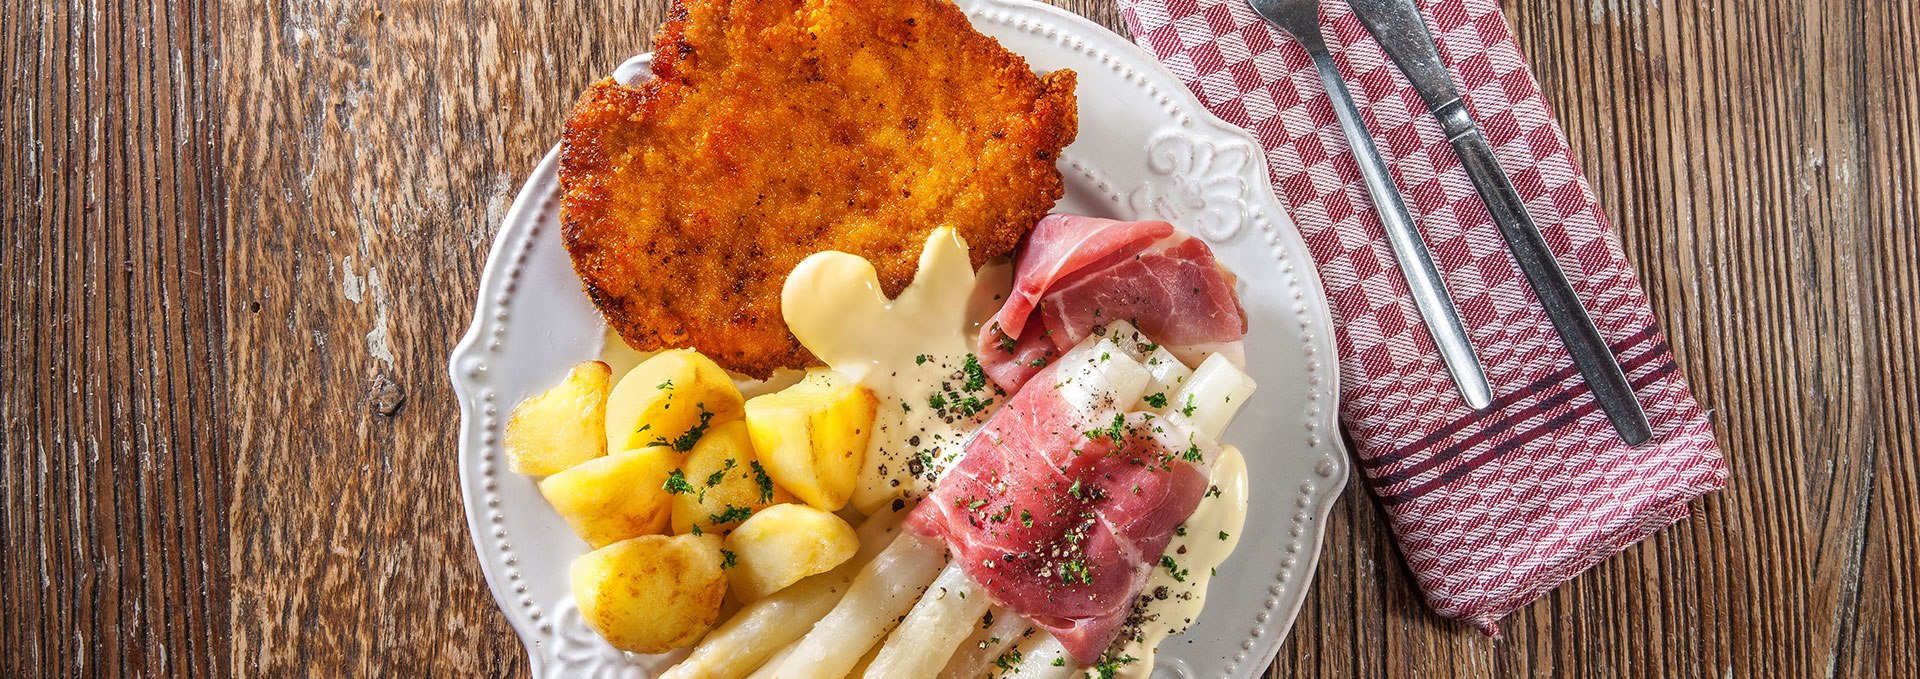 Asparagus with schnitzel